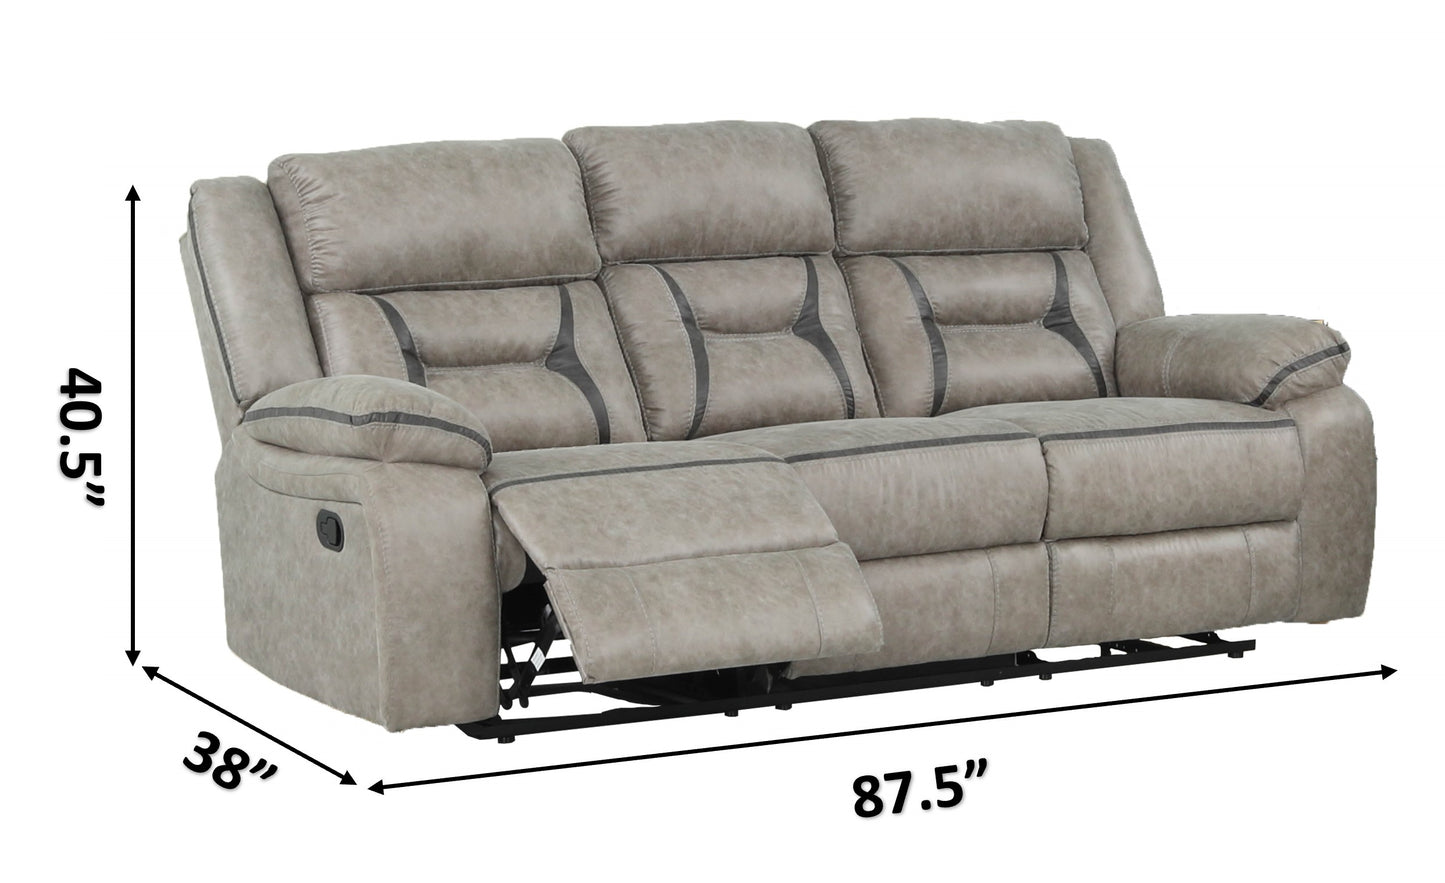 Denali Reclining 2PC sofa set with, Glider Reclining LoveSeat made with high performance fabric including inbuilt USB